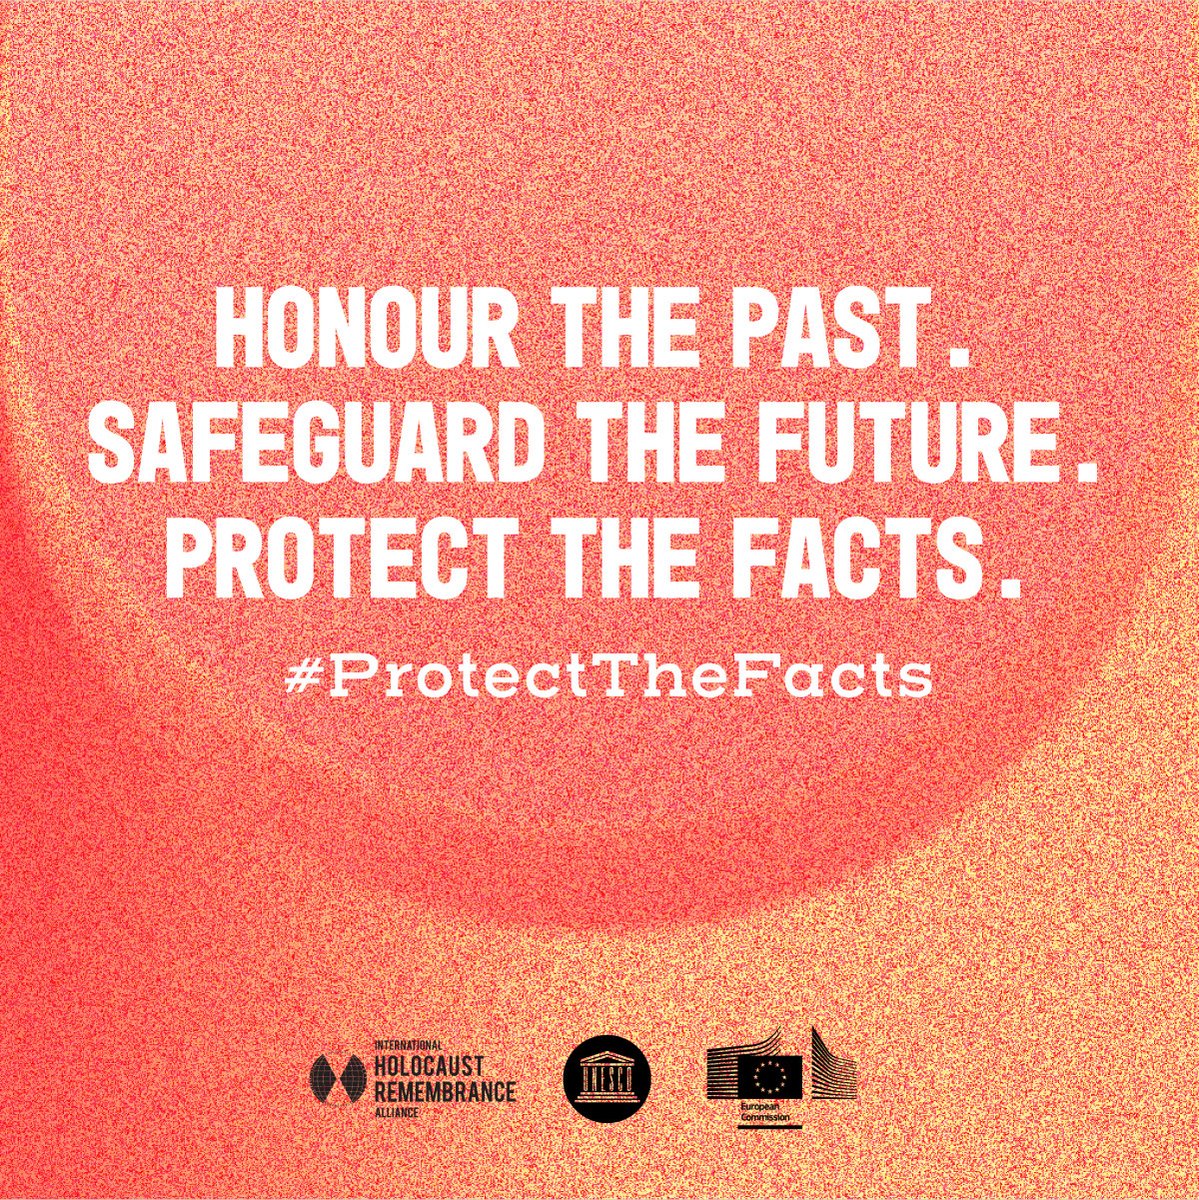 One month ago, the world commemorated #HolocaustRemembranceDay. But fighting against #HolocaustDistortion is a year-long battle! Find out more about @TheIHRA's #ProtectTheFacts campaign:  hayelinchoi.com/work/ihra